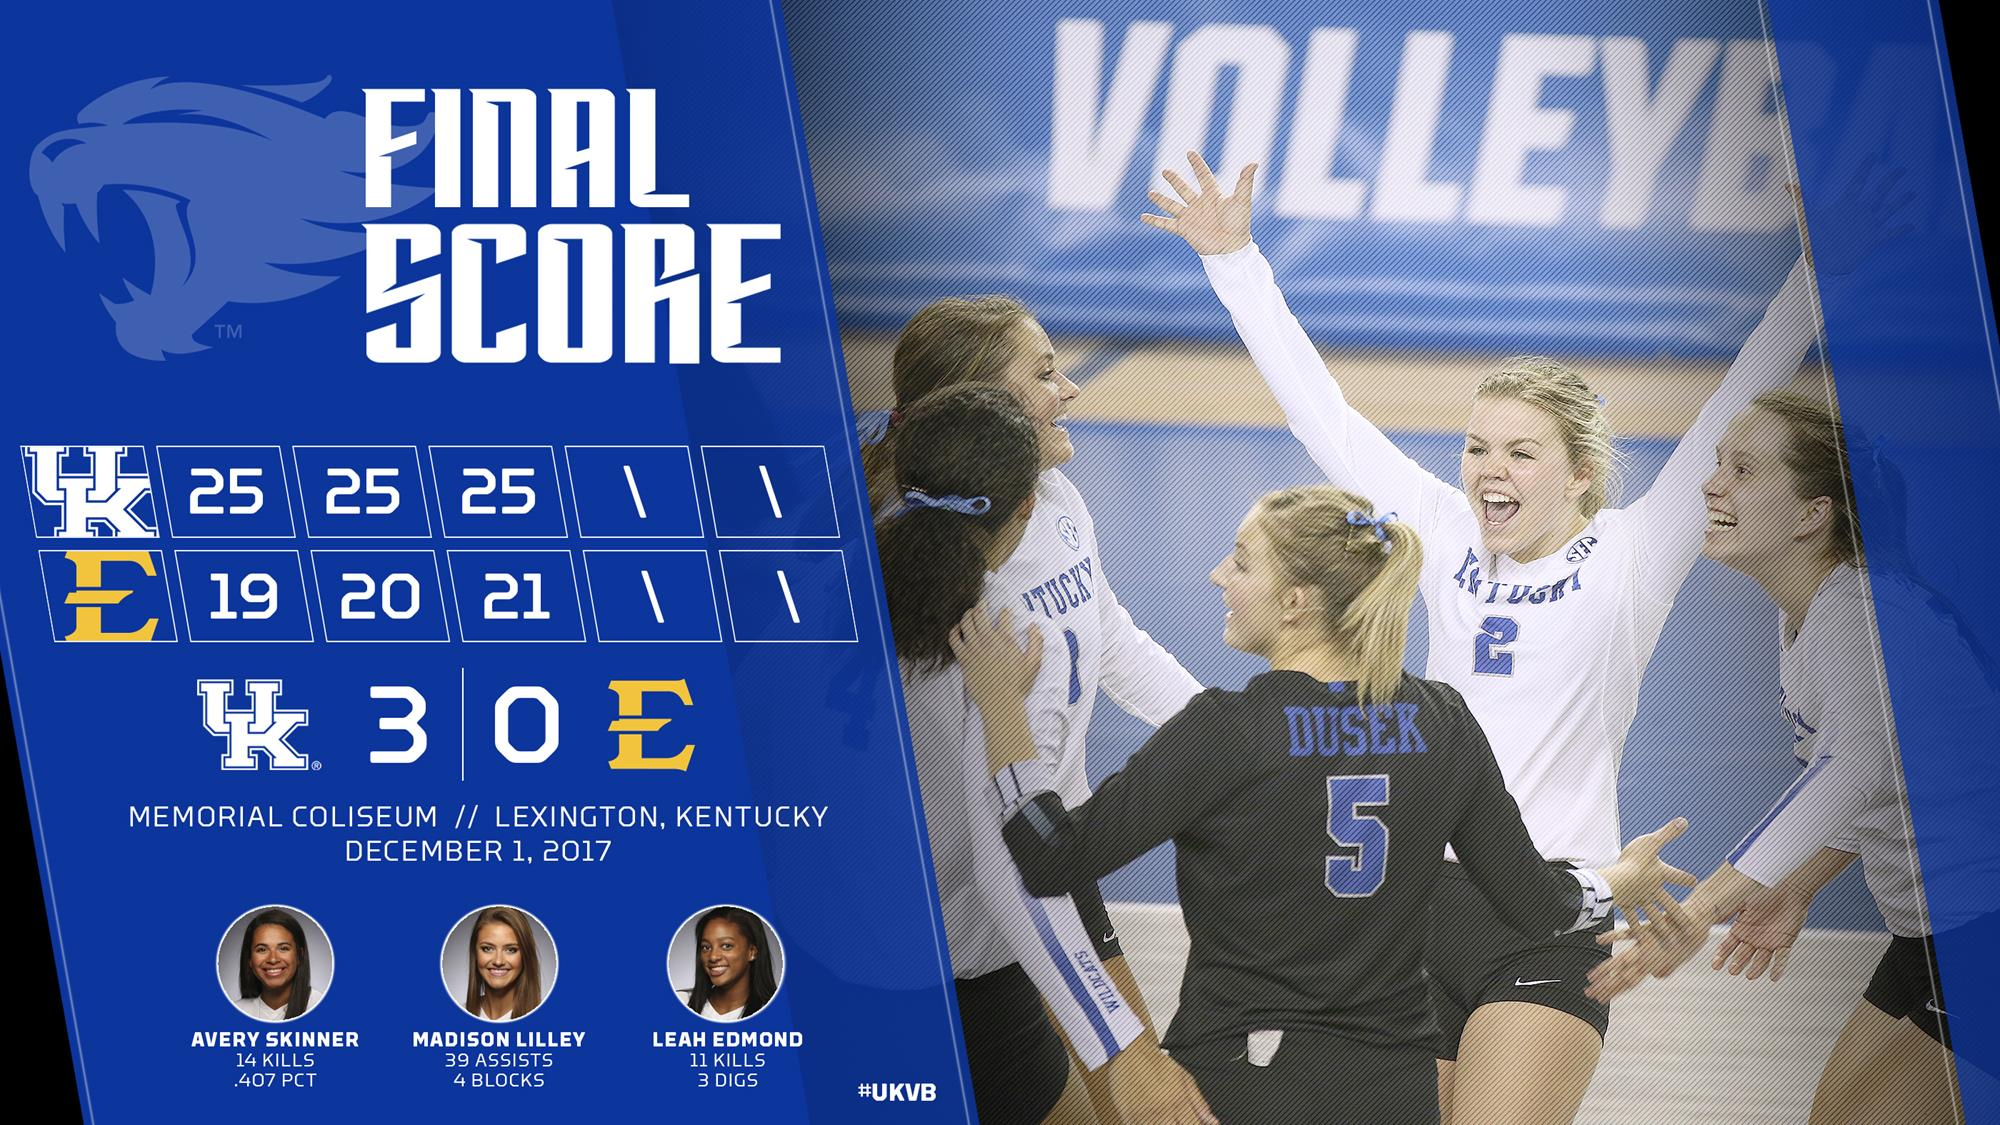 Kentucky Rolls to 3-0 Sweep of ETSU in NCAA First Round